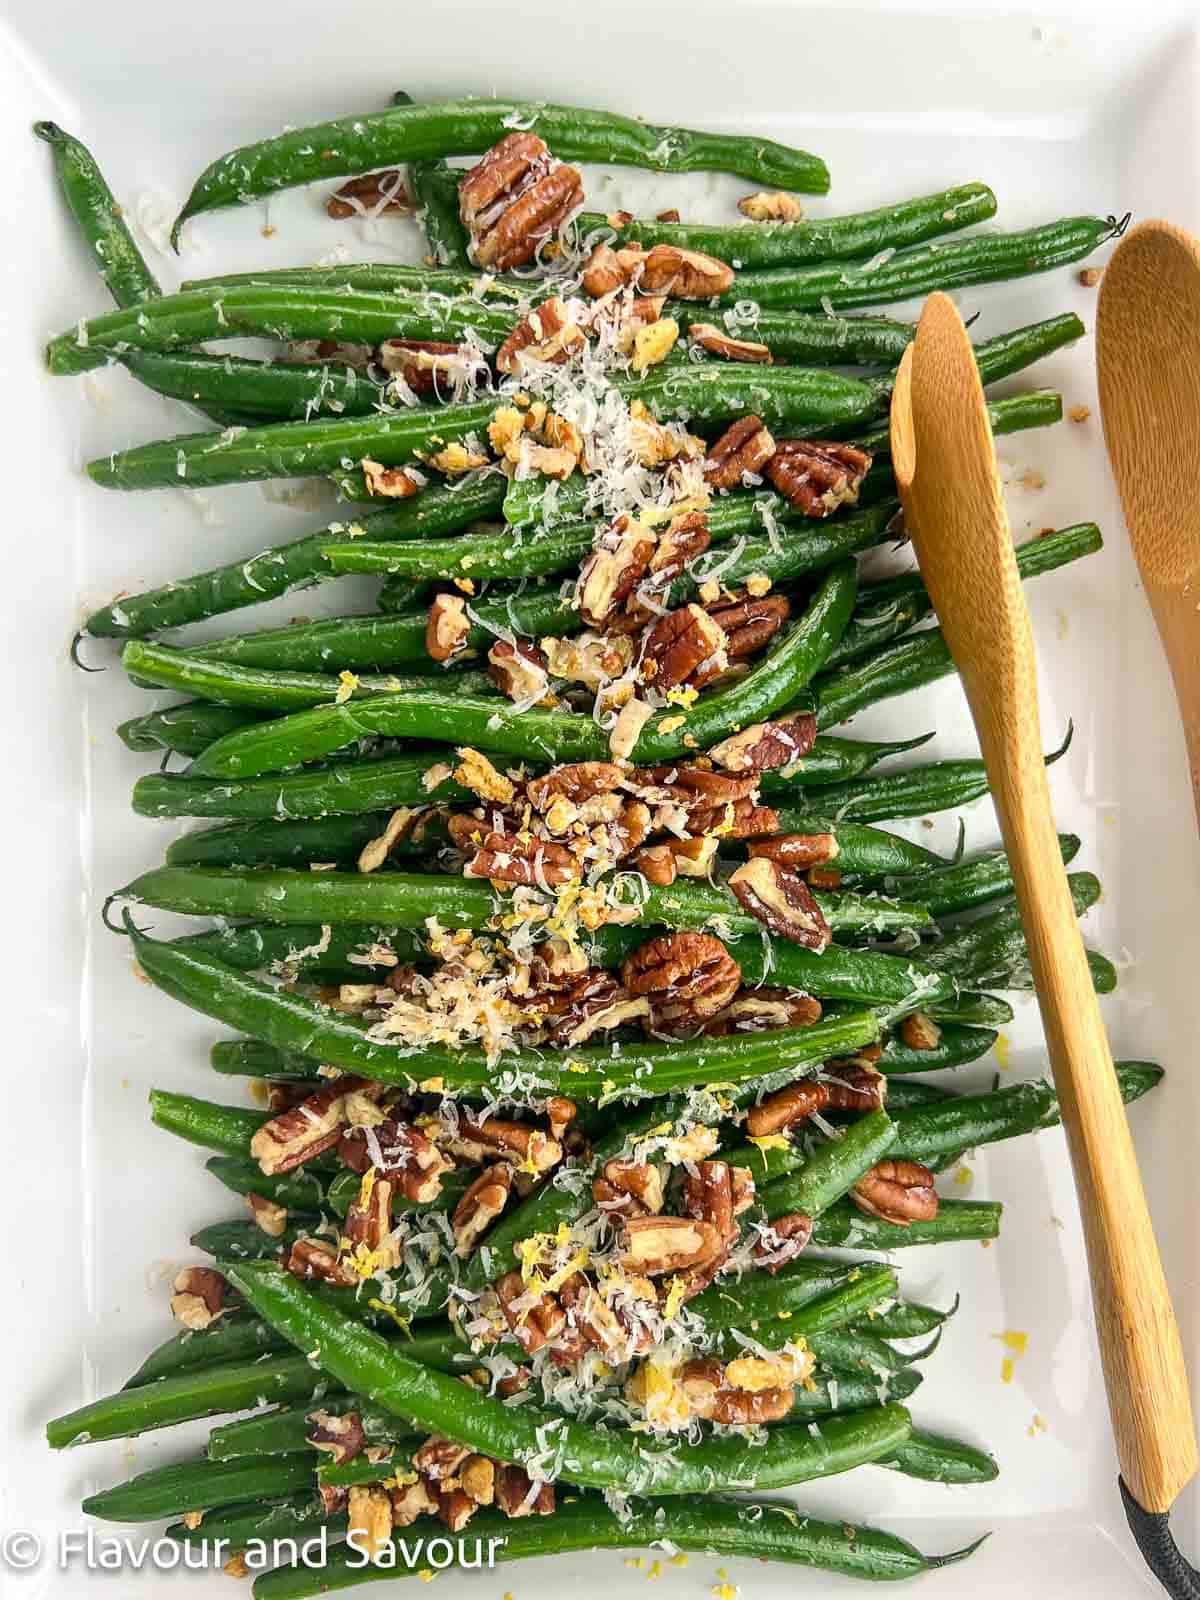 Sauteed garlic parmesan green beans with pecans on a serving dish.